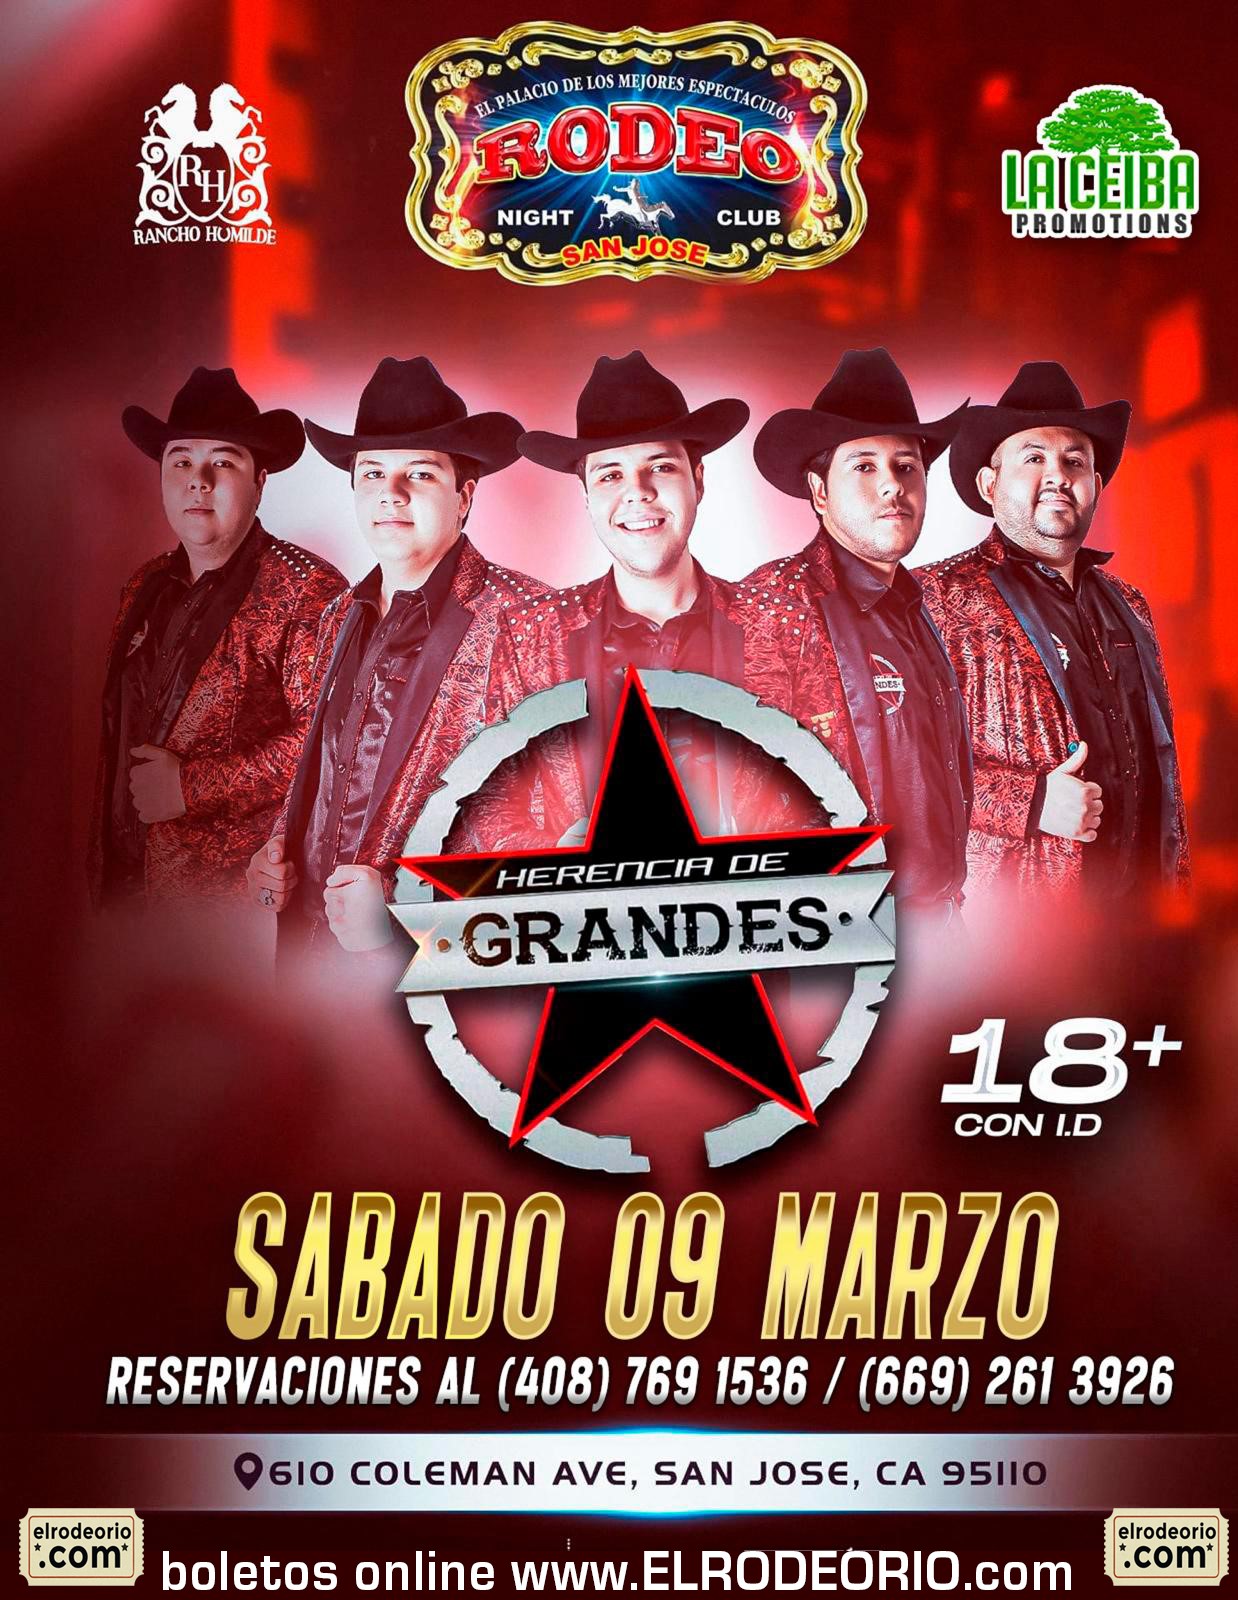 HERENCIA DE GRANDES  on Mar 09, 21:00@Club Rodeo - Buy tickets and Get information on elrodeorio.com sanjoseentertainment